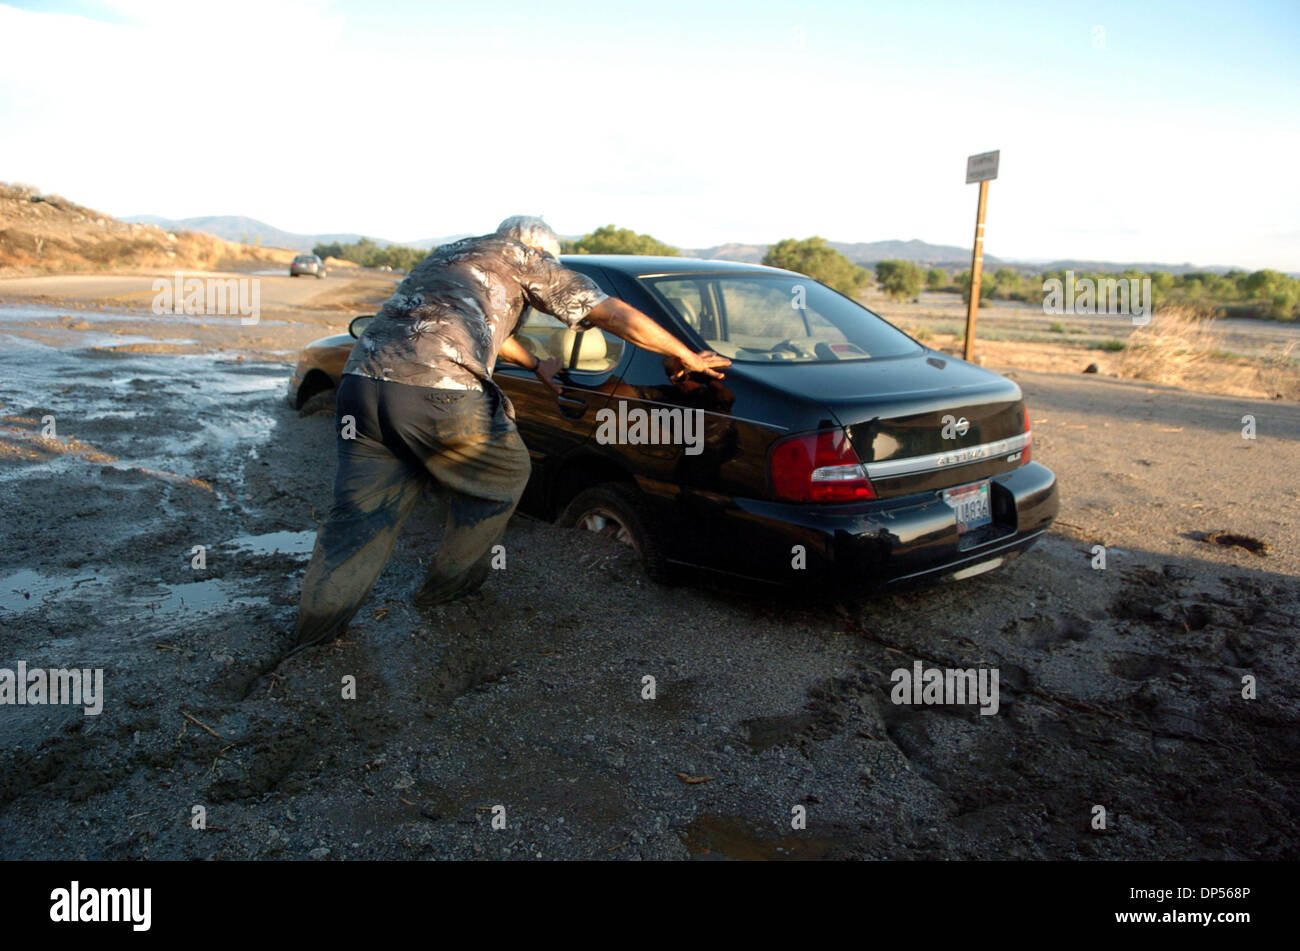 Sep 04, 2006; San Jacinto, CA, USA; Pat Maresca attempts to rescue his vehicle that was washed away in a mudslide along Soboba Road in San Jacinto on Monday. Multiple mudslides caused by heavy rain from a thunderstorm caused a mountain side to give way trapping 19 motorists along the roadway.  There were no reported injuries. Mandatory Credit: Photo by Steven K. Doi/ZUMA Press. (©) Stock Photo